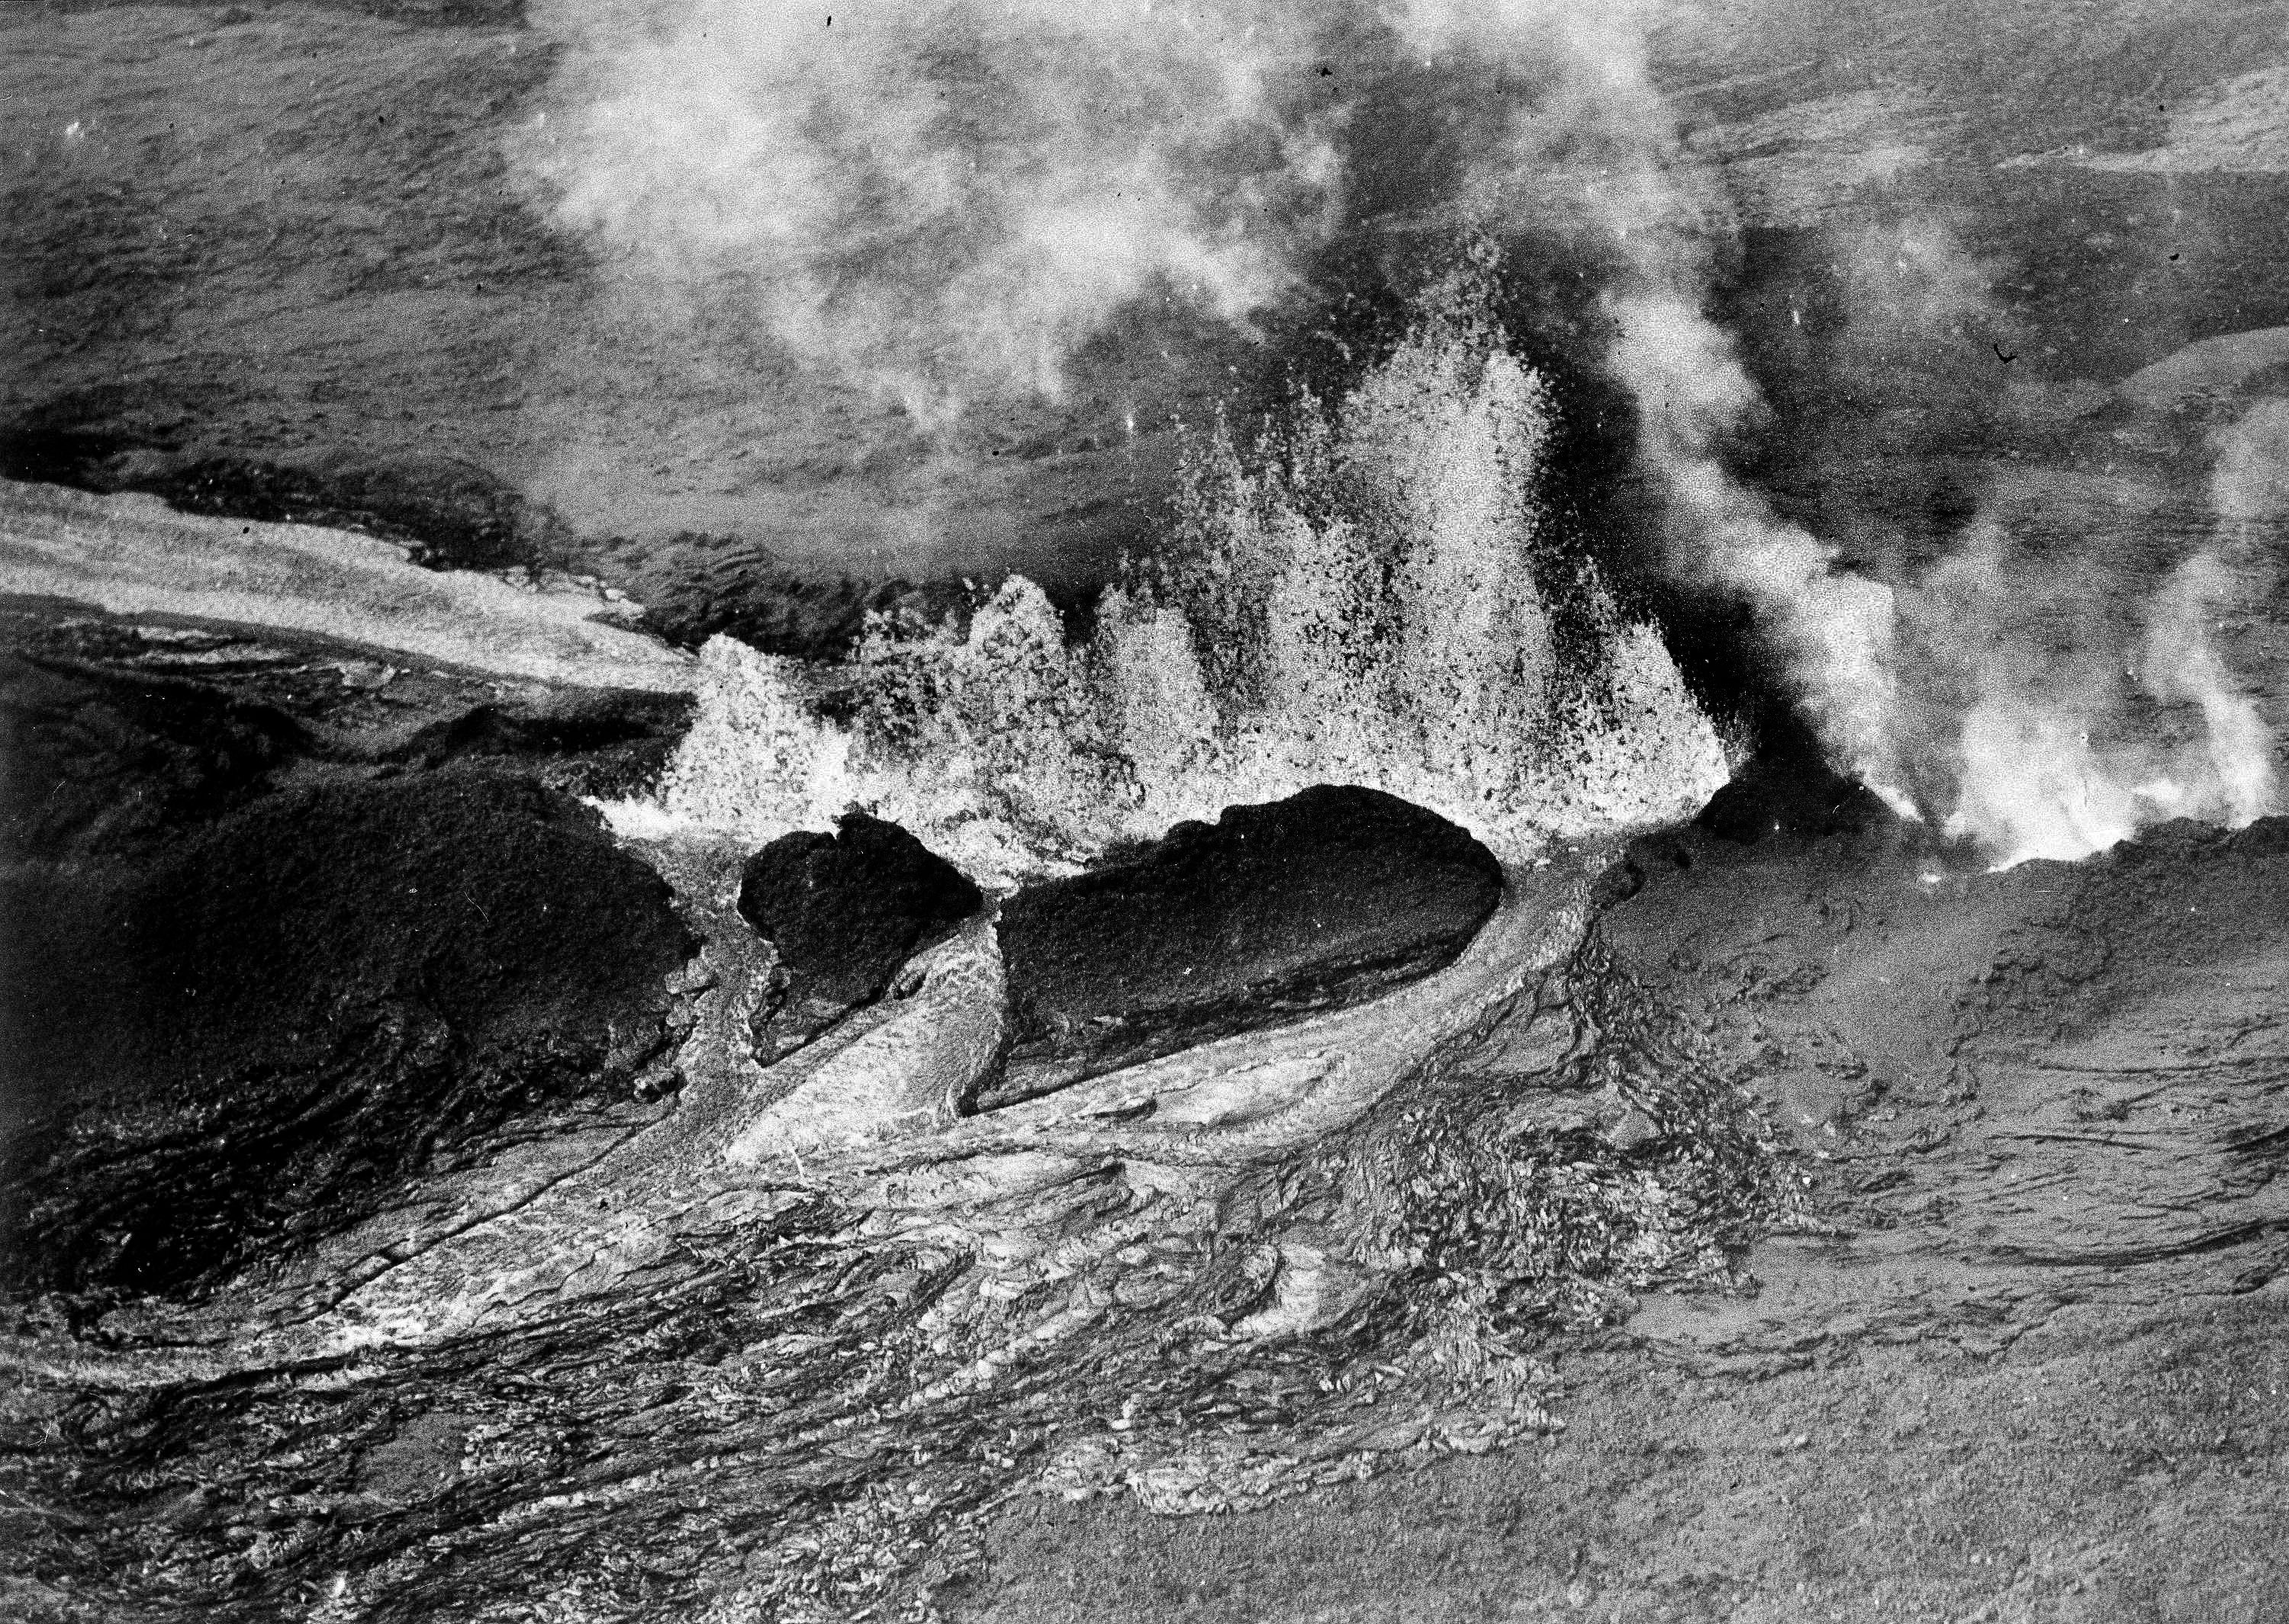 Geysers of lava spurt from Mauna Loa during its eruption in 1942; that explosion lasted for less than a month. (Photo: AP Photo, AP)